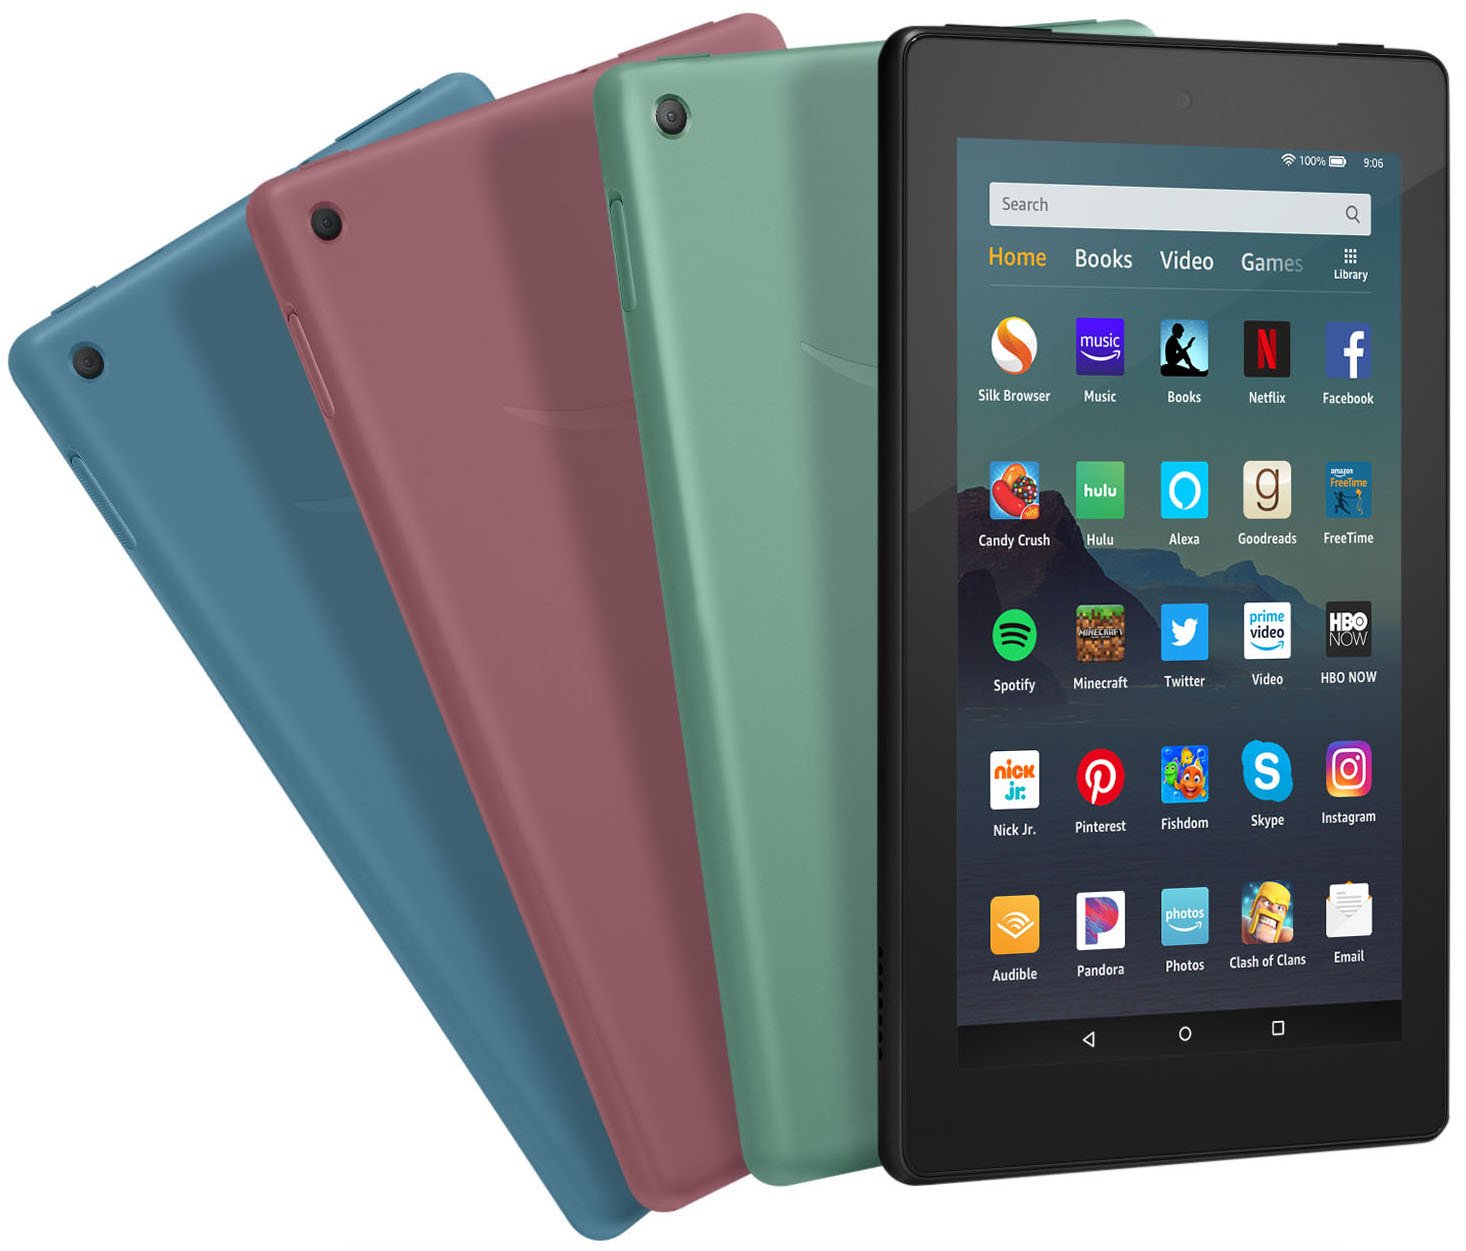 Save big on Amazon's Fire tablets with these Cyber Monday deals